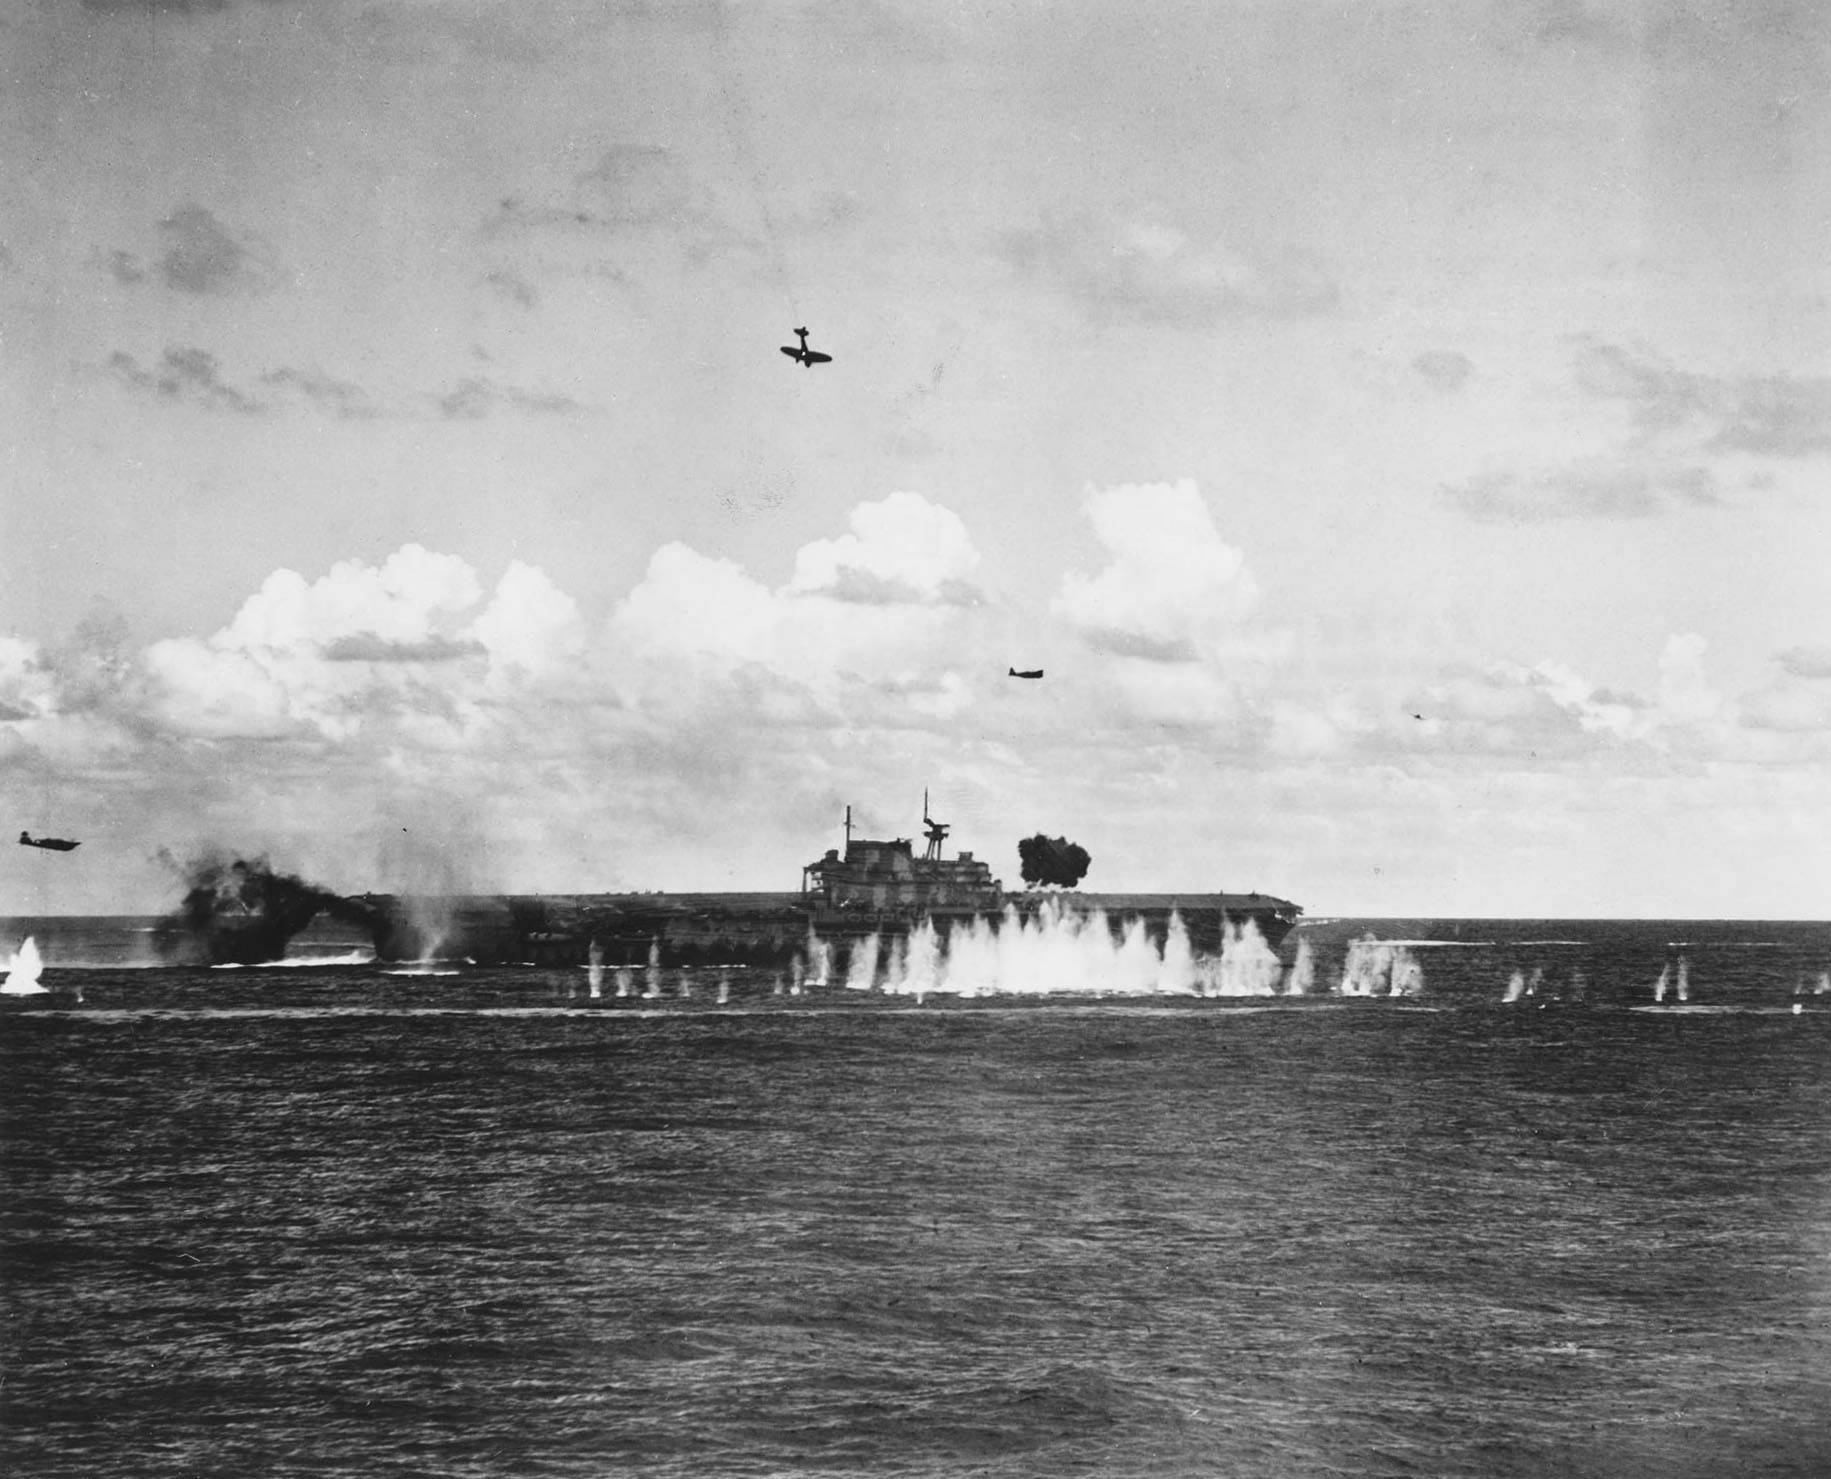 Japanese pilot Shigeyuki Sato in a D3A dive bomber plunging toward USS Hornet during Battle of the Santa Cruz Islands, 26 Oct 1942; note B5N torpedo bomber in level flight and splash from anti-aircraft shell burst in front of Hornet